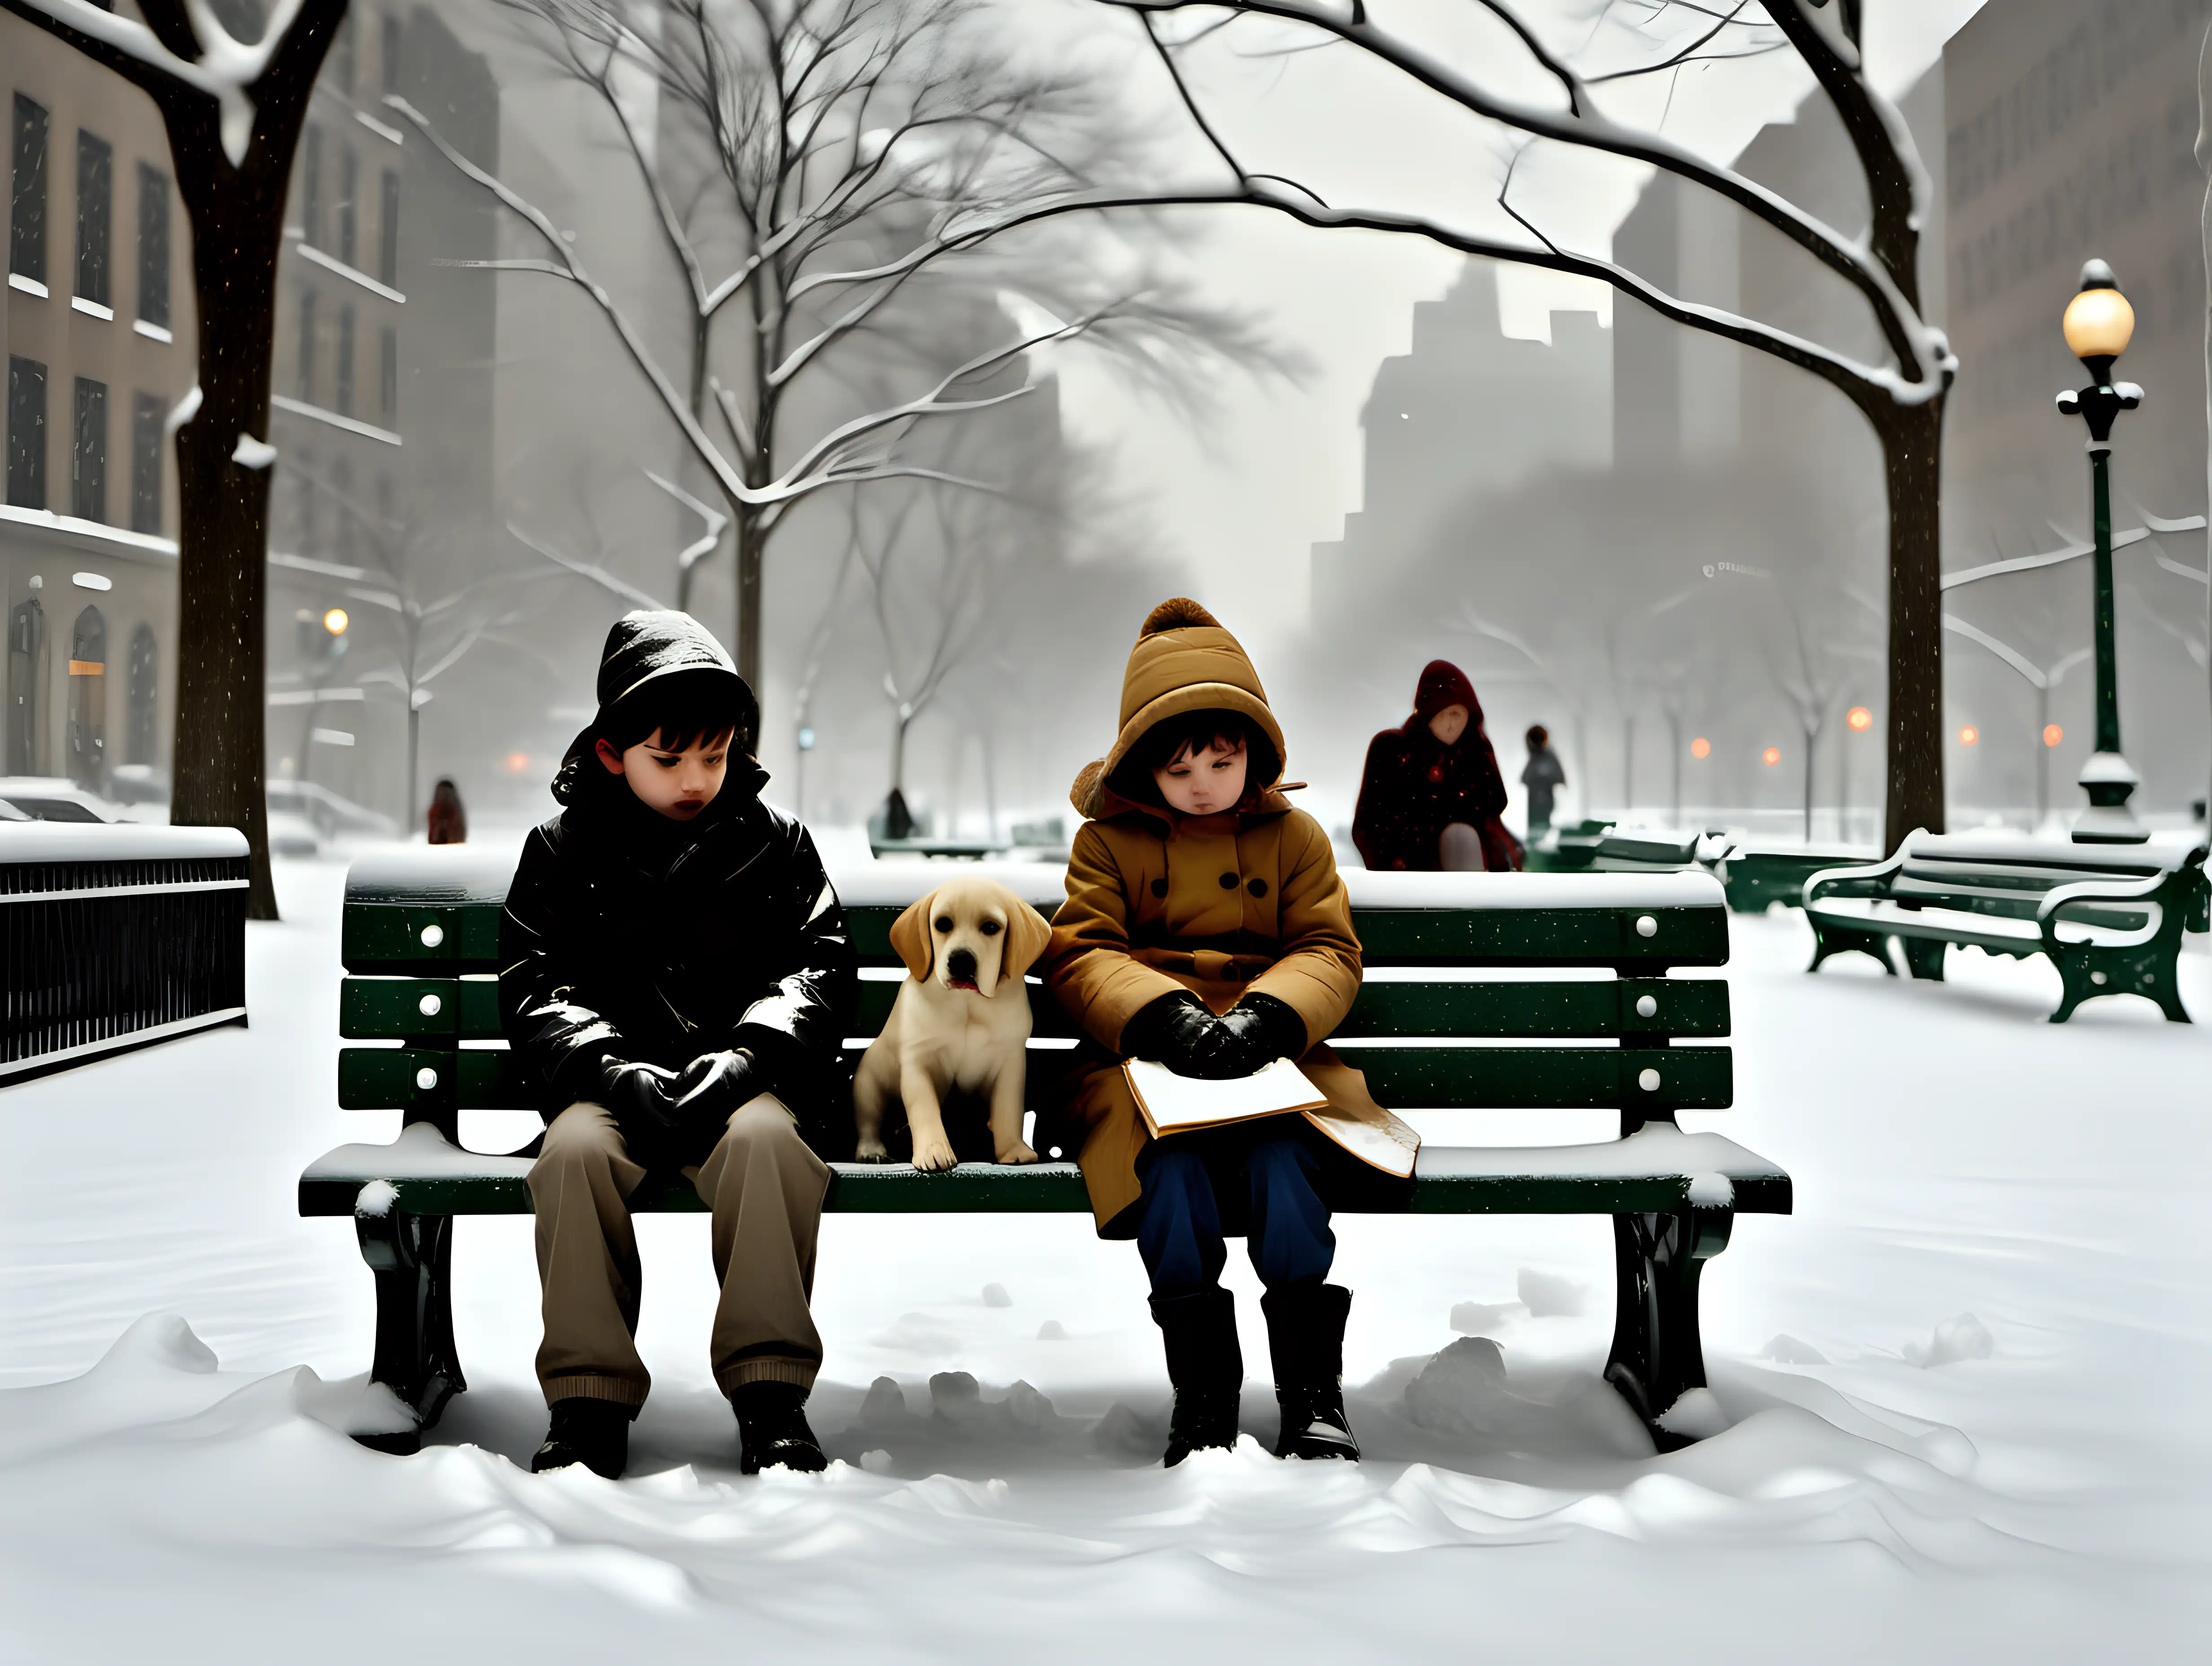 Children and Puppy on Park Bench in NYC Snowstorm HopperInspired Scene